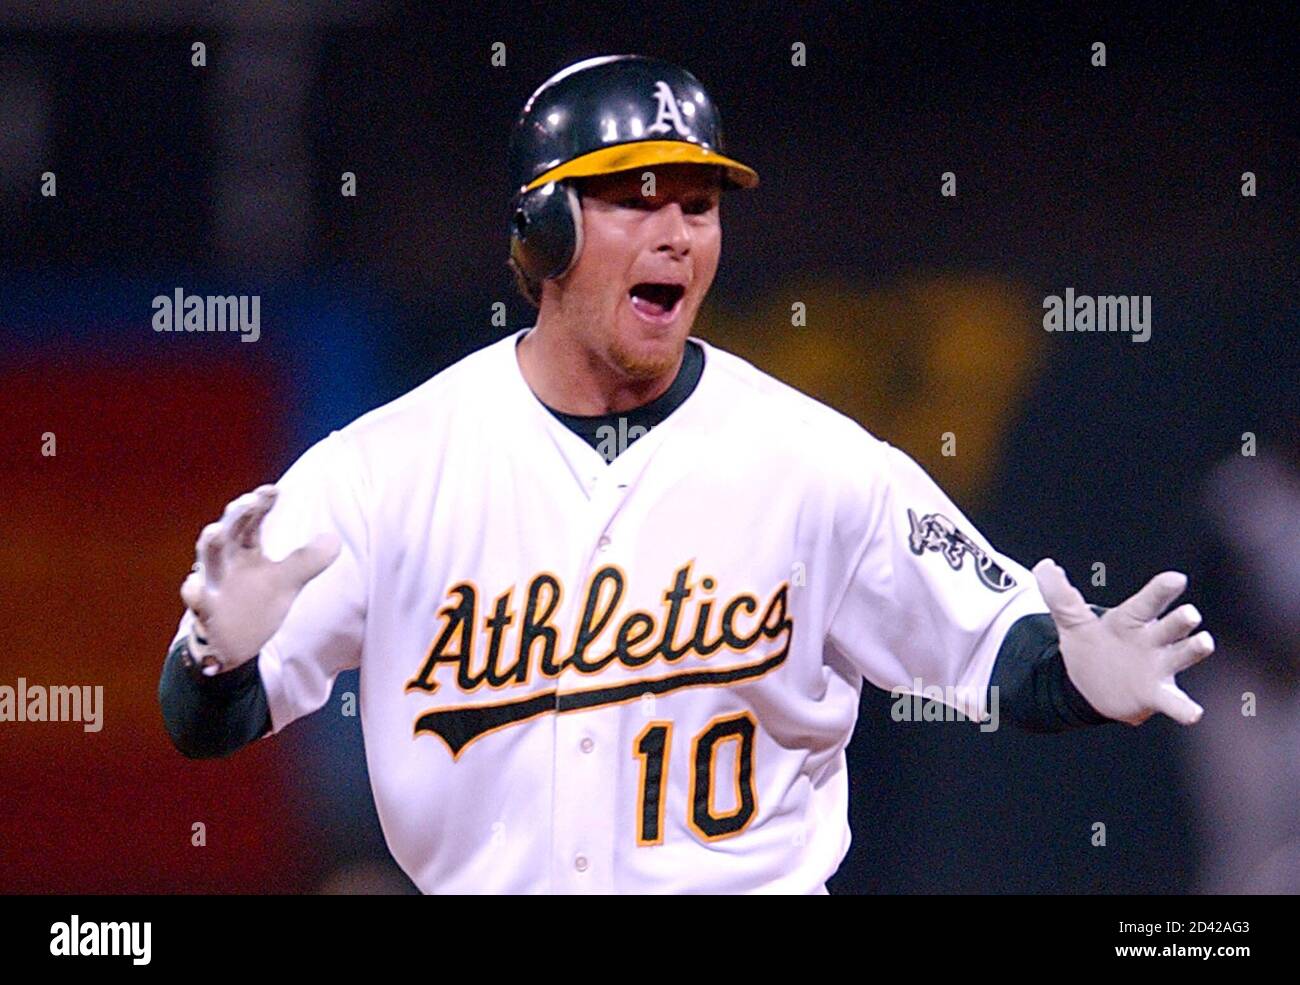 Oakland Athletics' Scott Hatteberg celebrates after hitting a game-winning  home run against the Kansas City Royals during the 9th inning at the  Network Associates Coliseum in Oakland, Calif. September 4, 2002. The